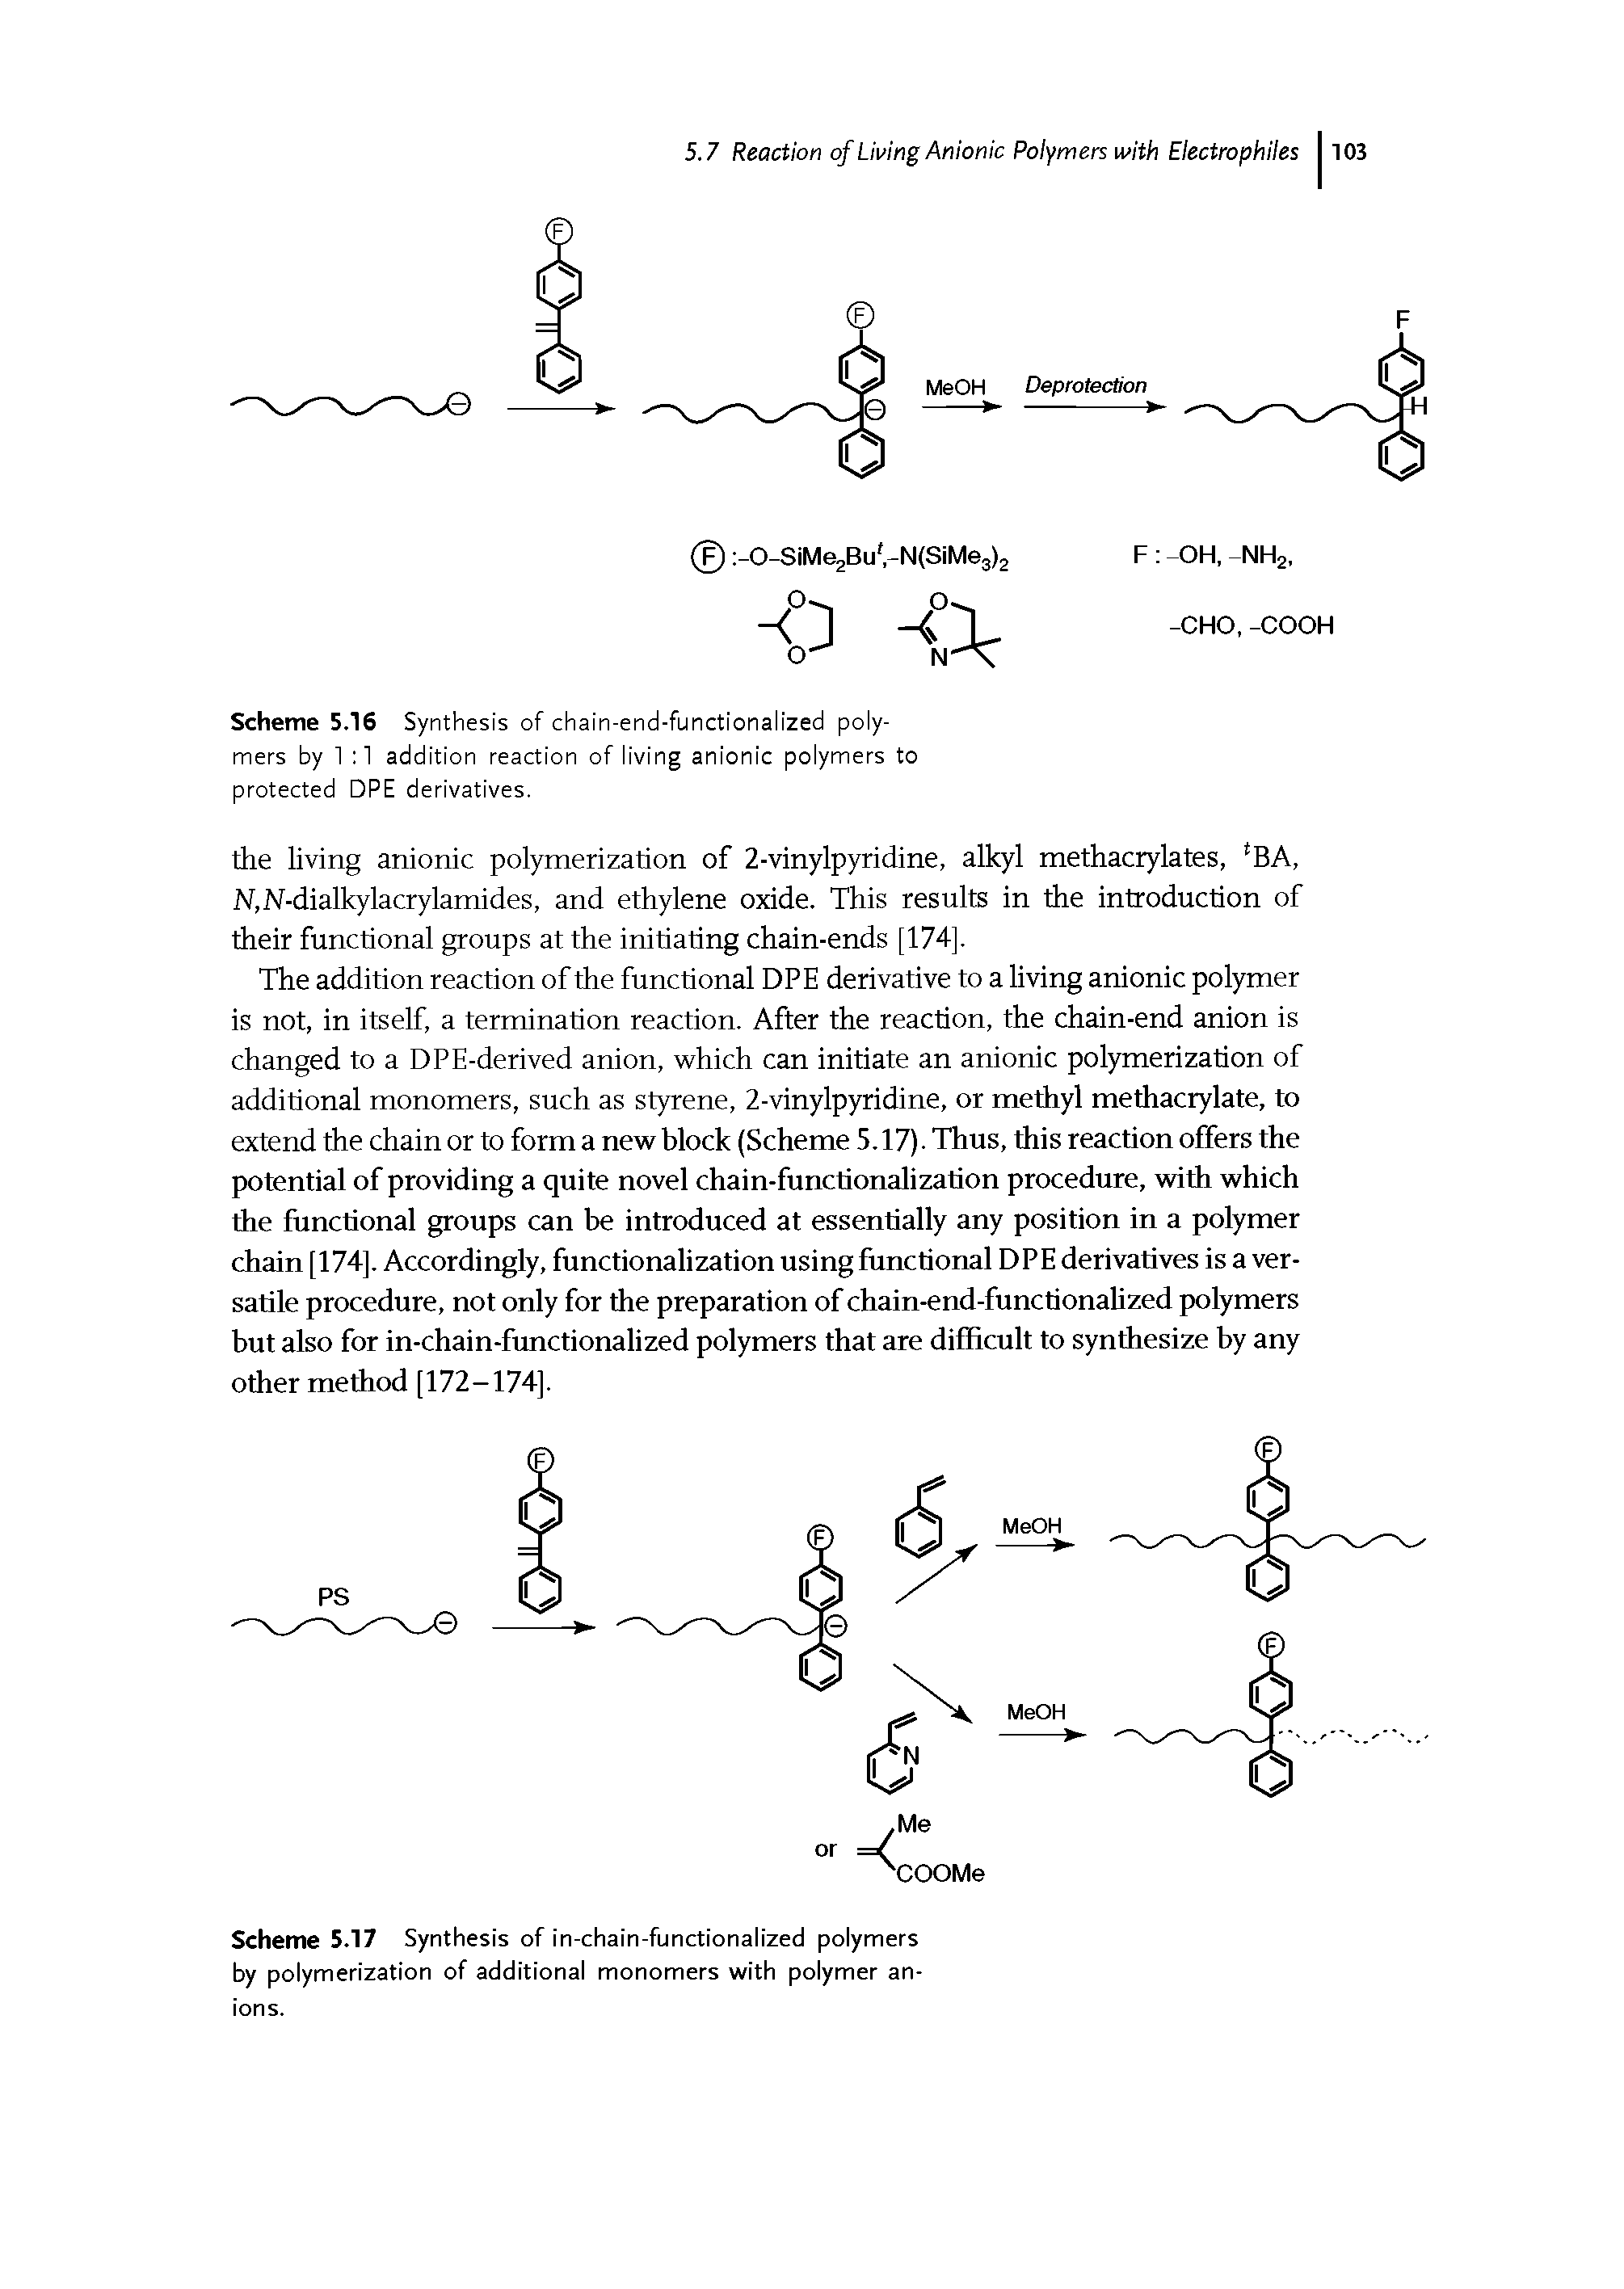 Scheme 5.17 Synthesis of in-chain-functionalized polymers by polymerization of additional monomers with polymer anions.